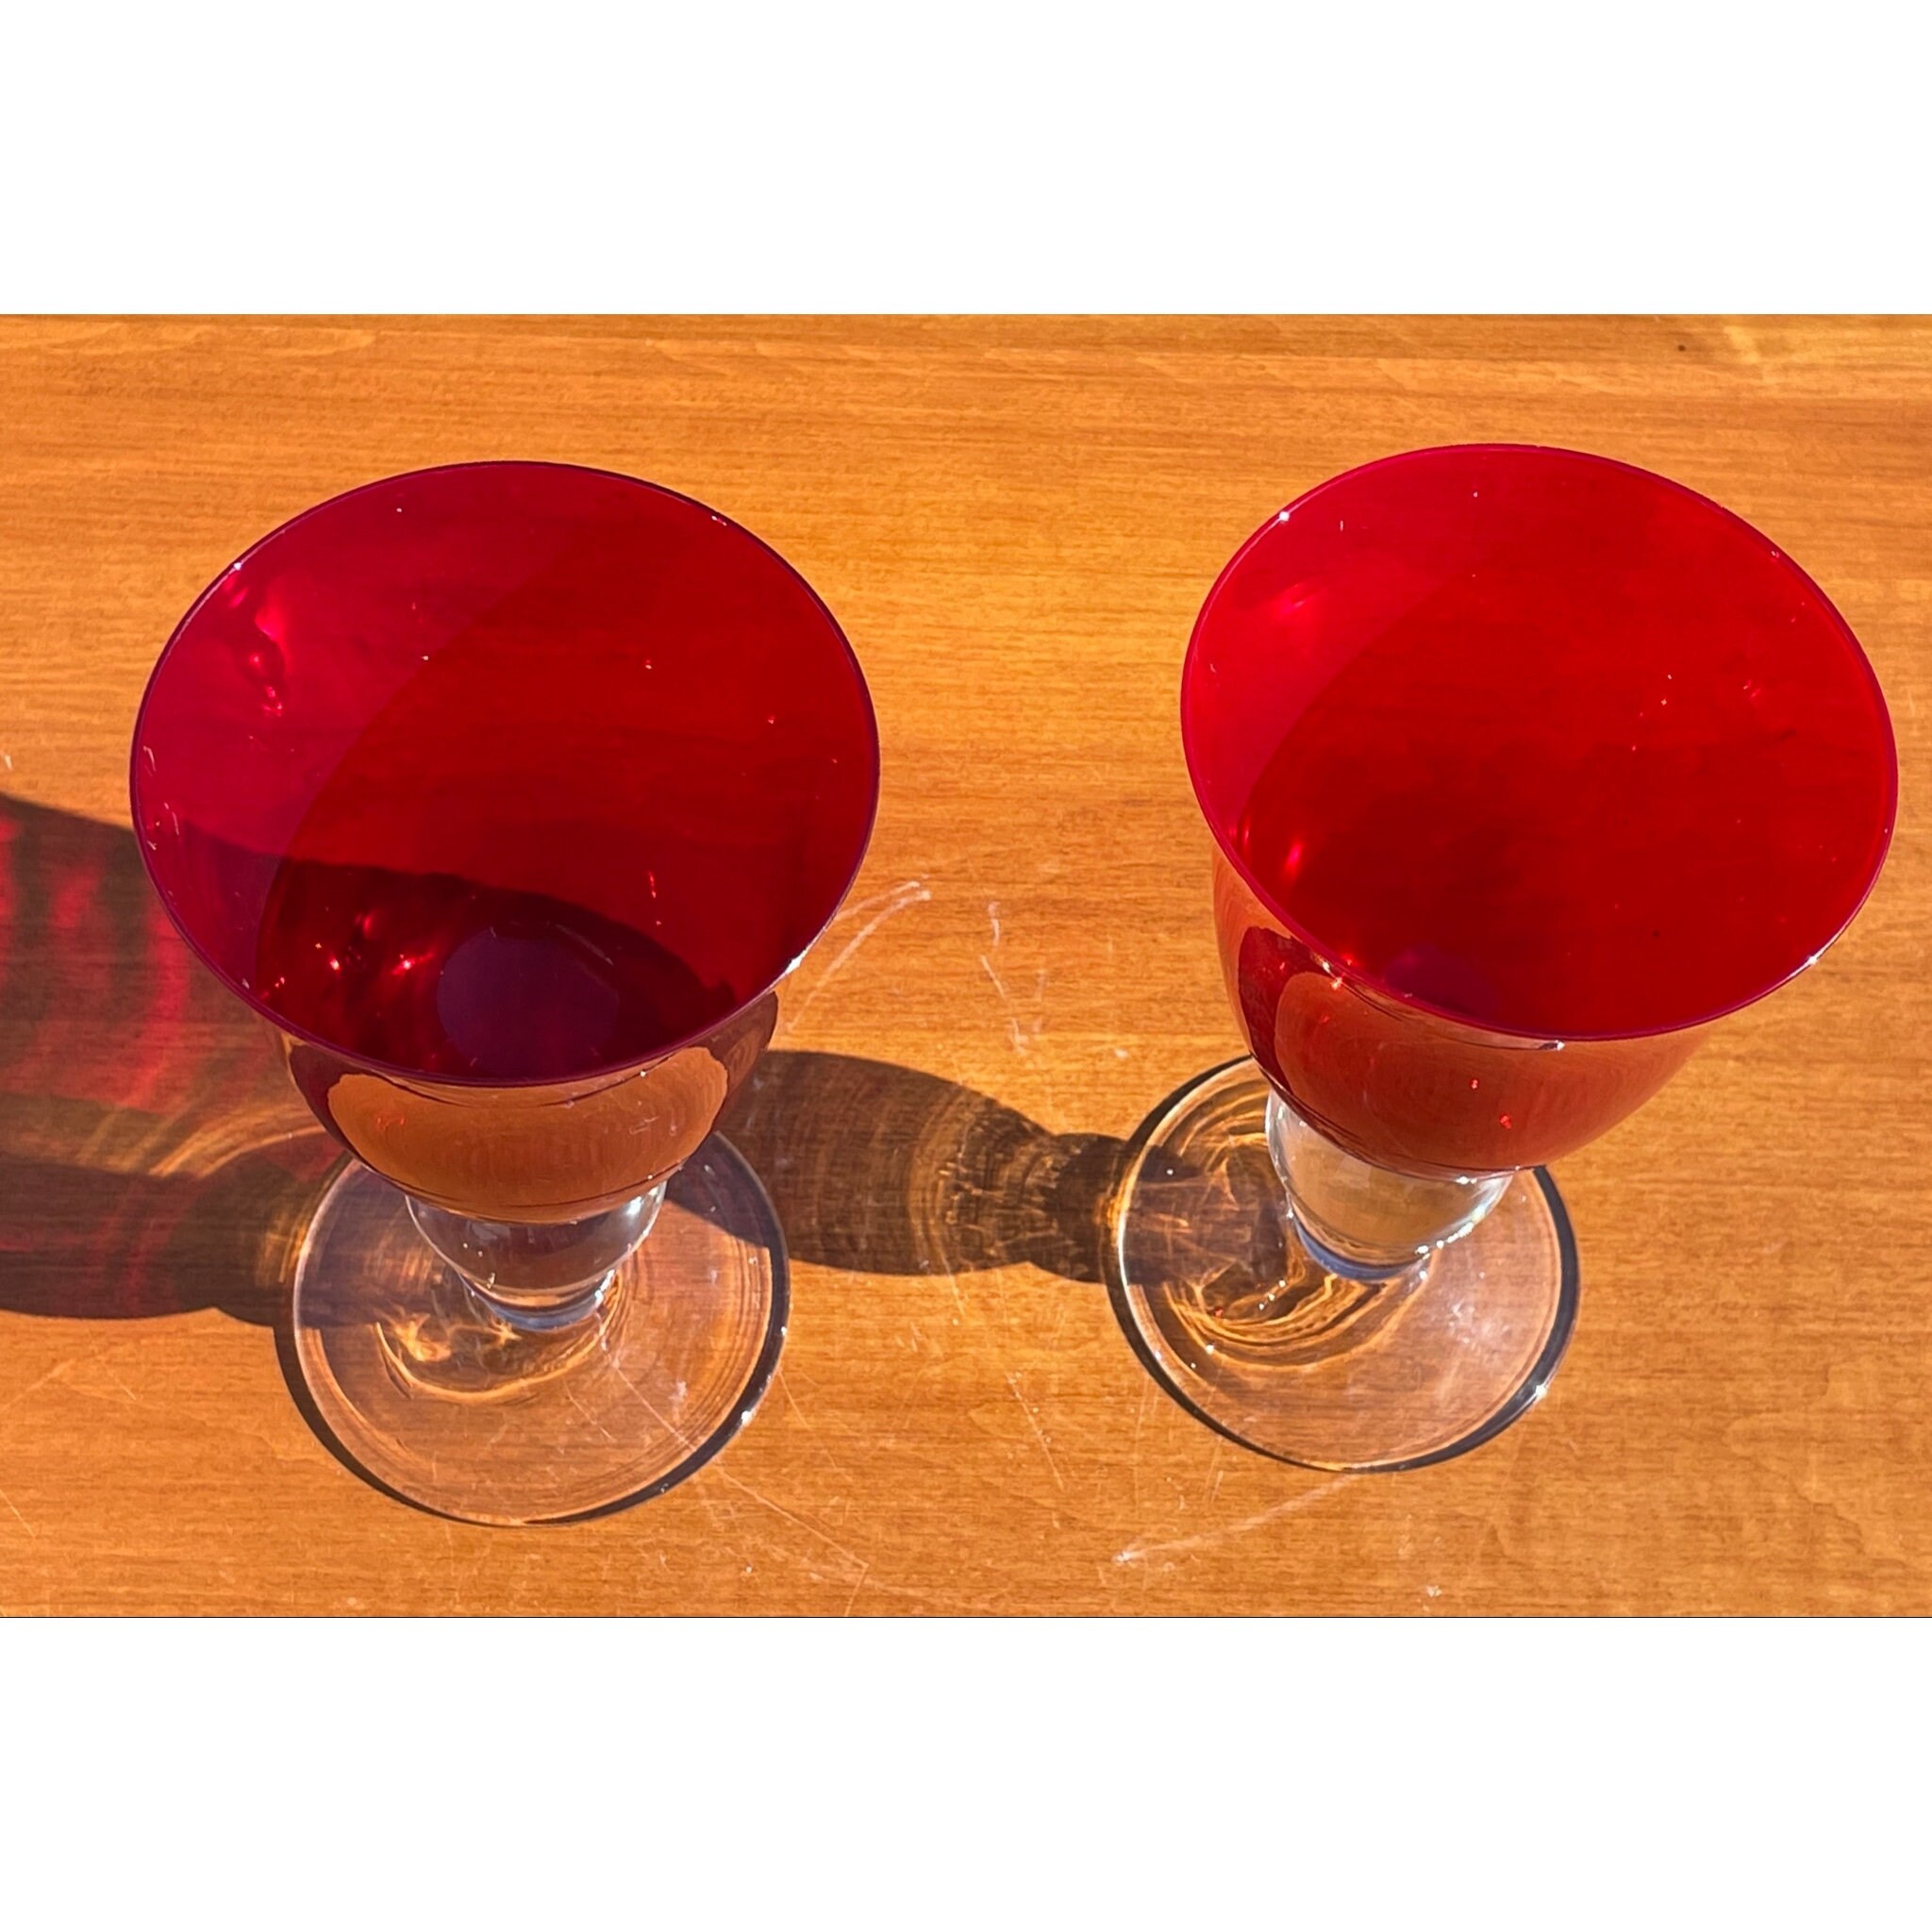 Colored Wine Goblets Glasses Round Bowl Long Thin Clear Stem Fine Stemware  Mint